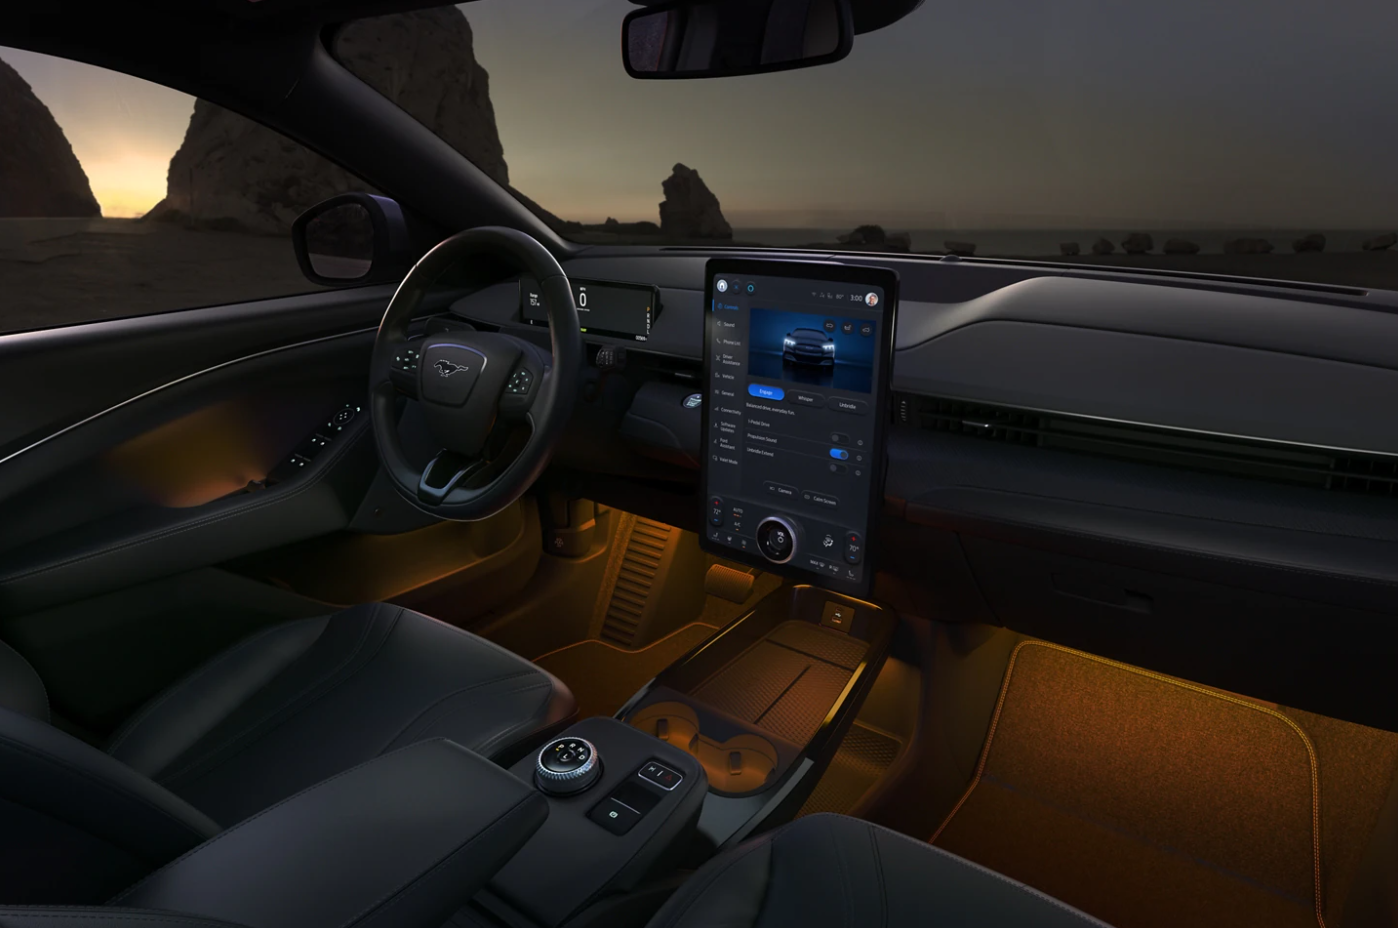 A view of the cabin of a Ford vehicle with accent lighting installed